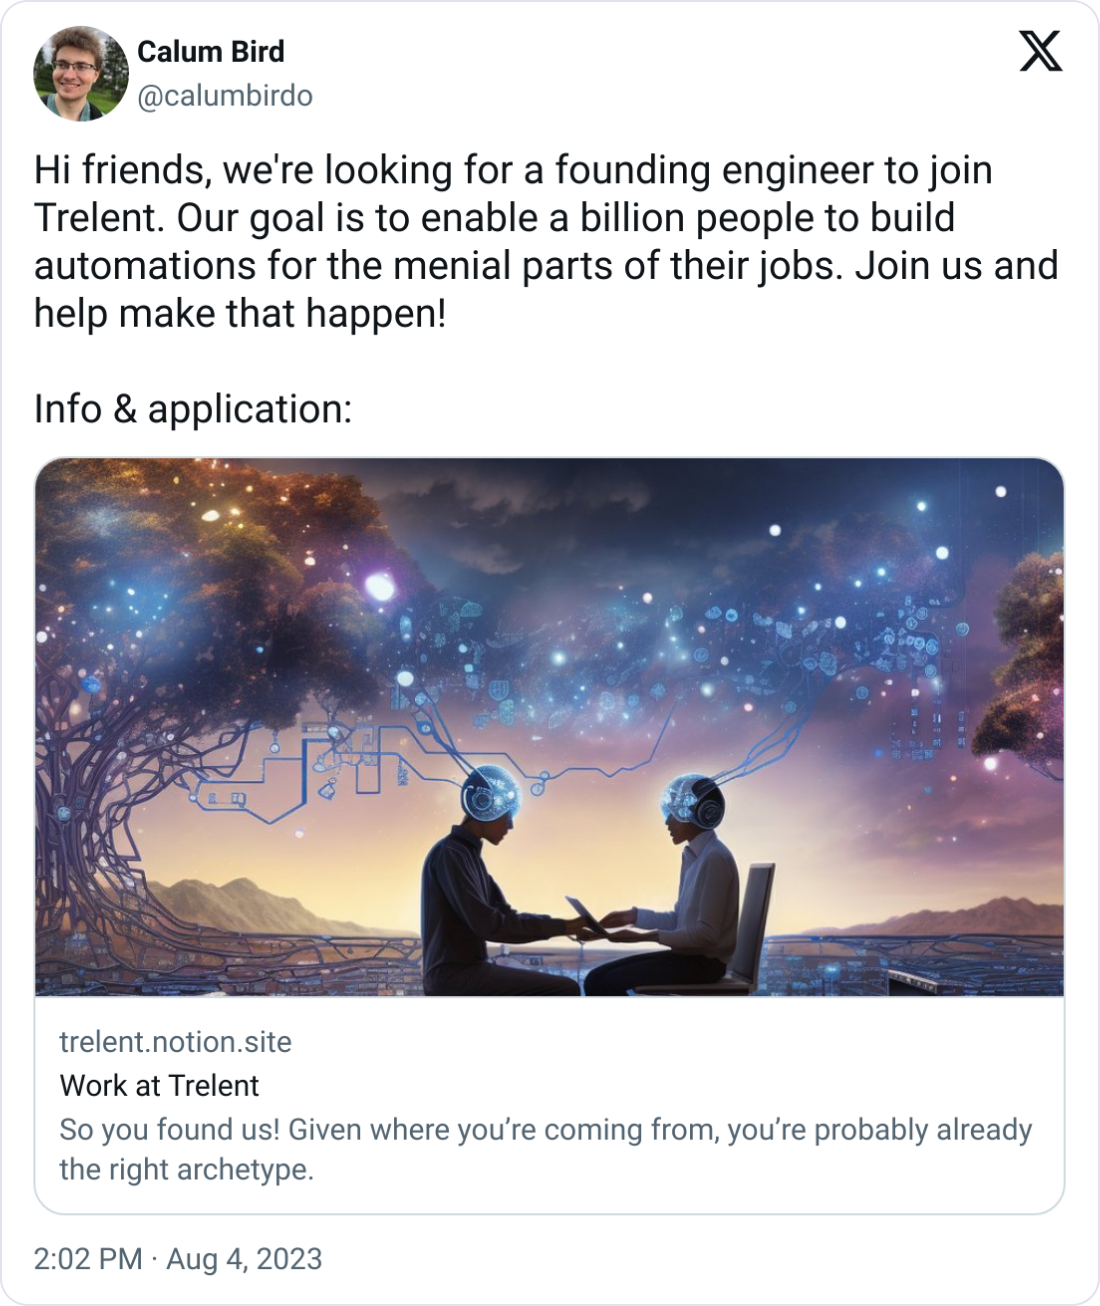 Calum Bird @calumbirdo Hi friends, we're looking for a founding engineer to join Trelent. Our goal is to enable a billion people to build automations for the menial parts of their jobs. Join us and help make that happen!  Info & application: